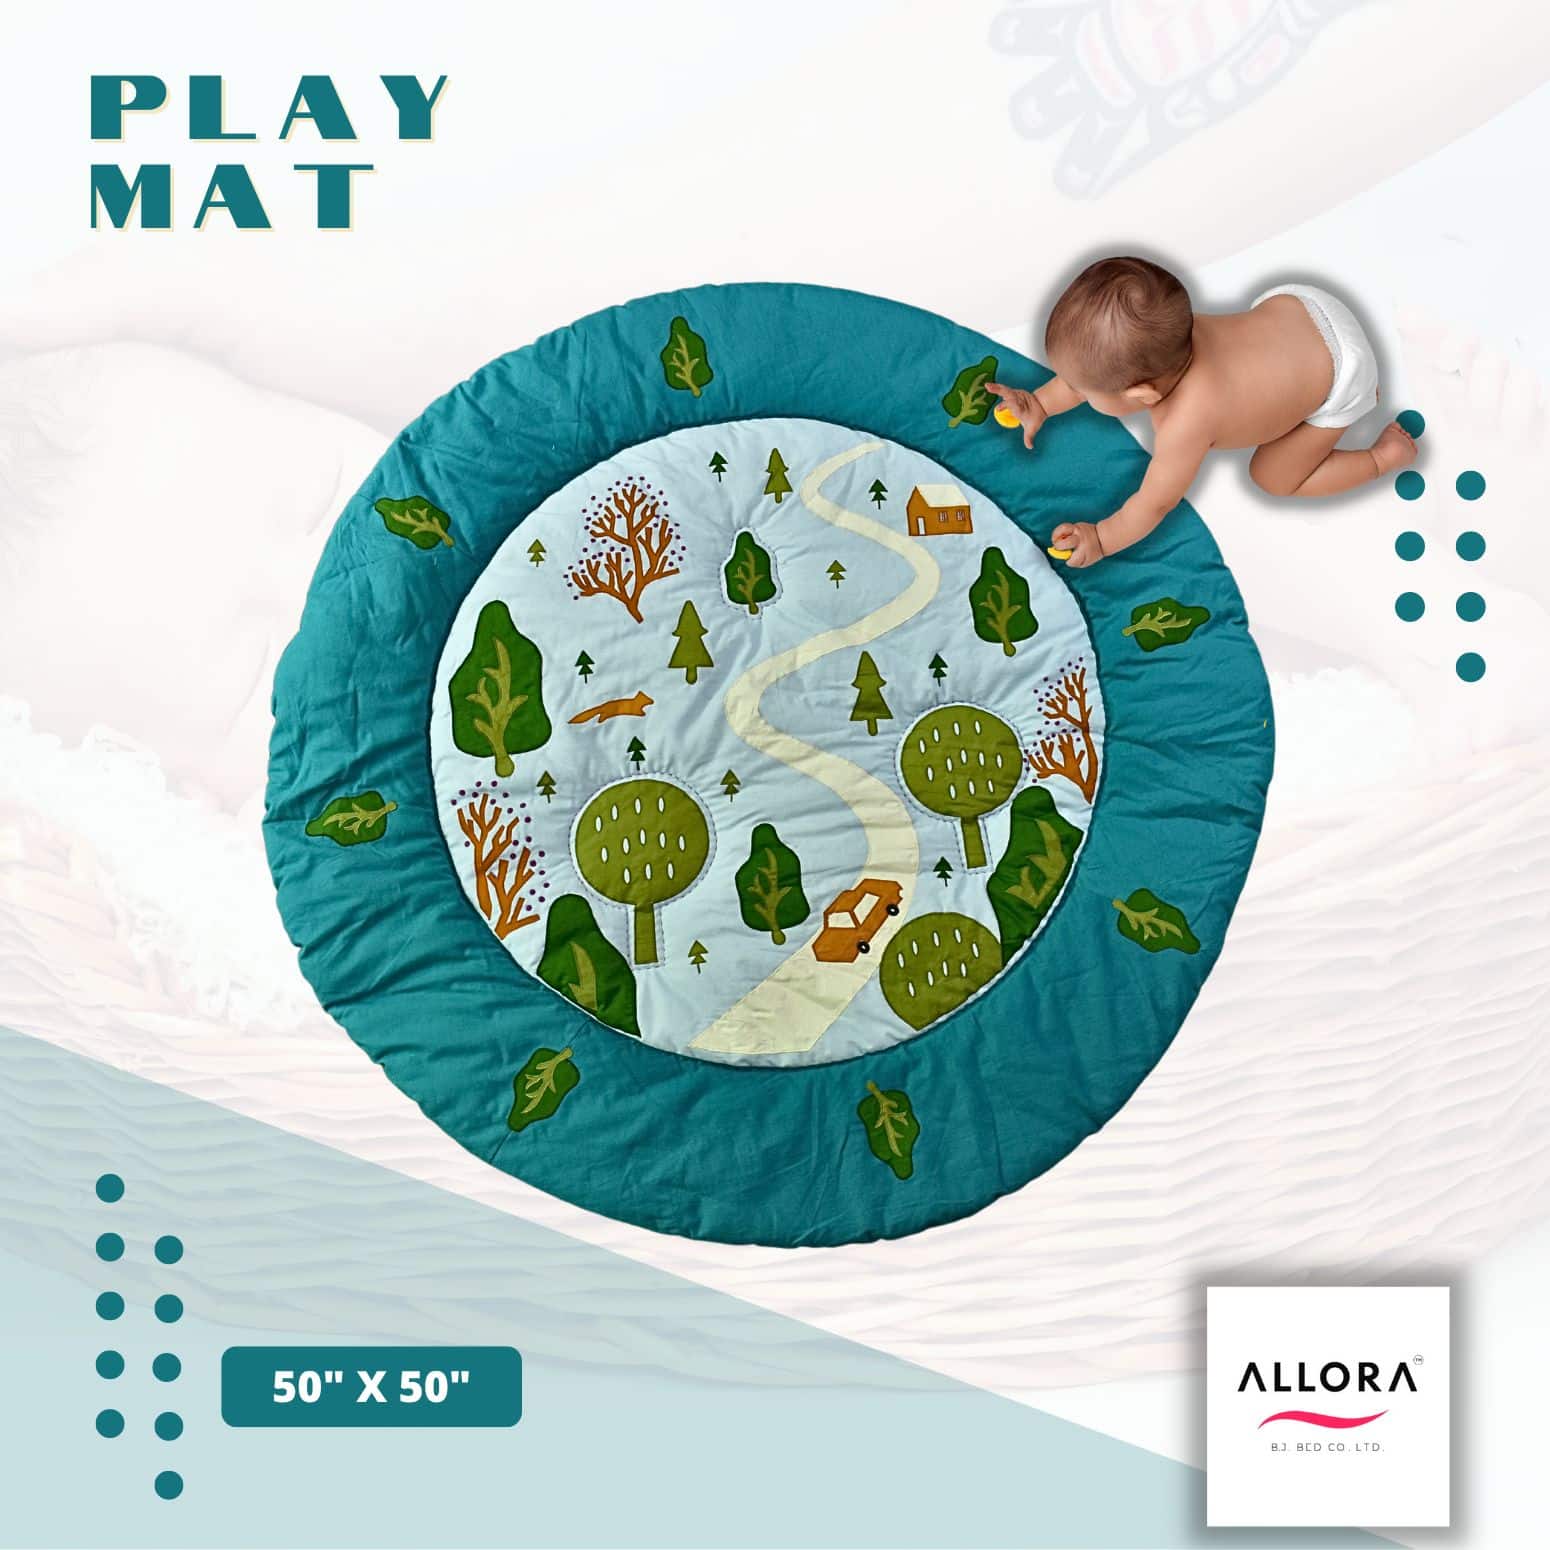 Playmat For Baby’s 50″ x 50″